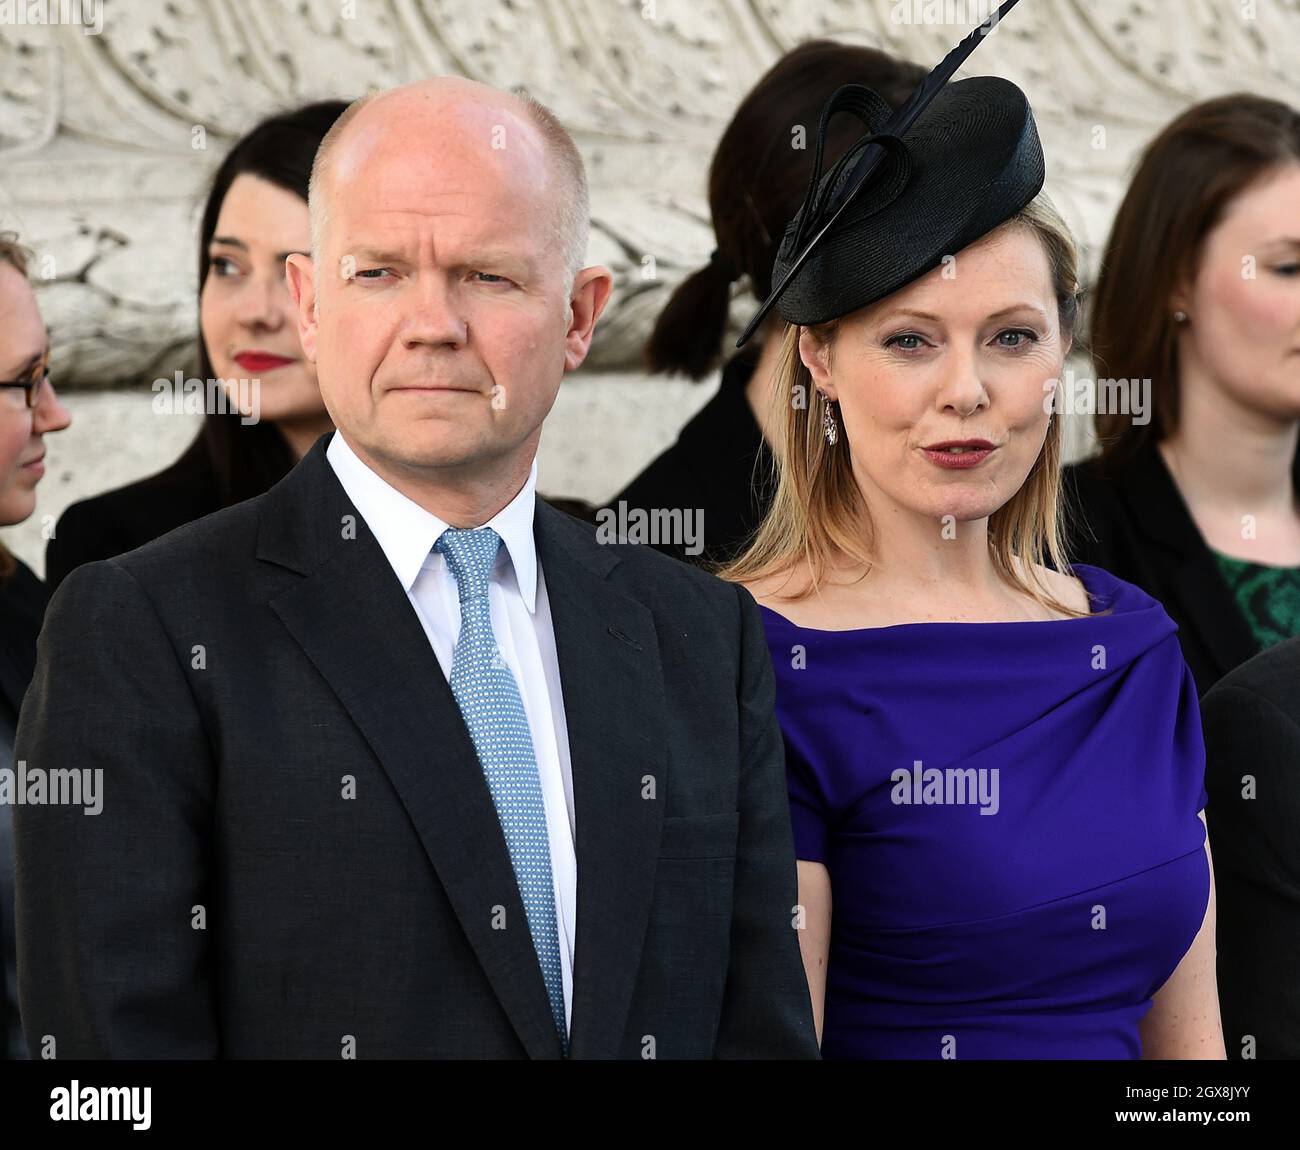 British Foreign Secretary William Hague and wife Ffion Hague attend an official welcoming ceremony for Queen Elizabeth ll at The Arc de Triomphe in Paris on the first day of The Queen's State Visit to France on June 5, 2014. Stock Photo